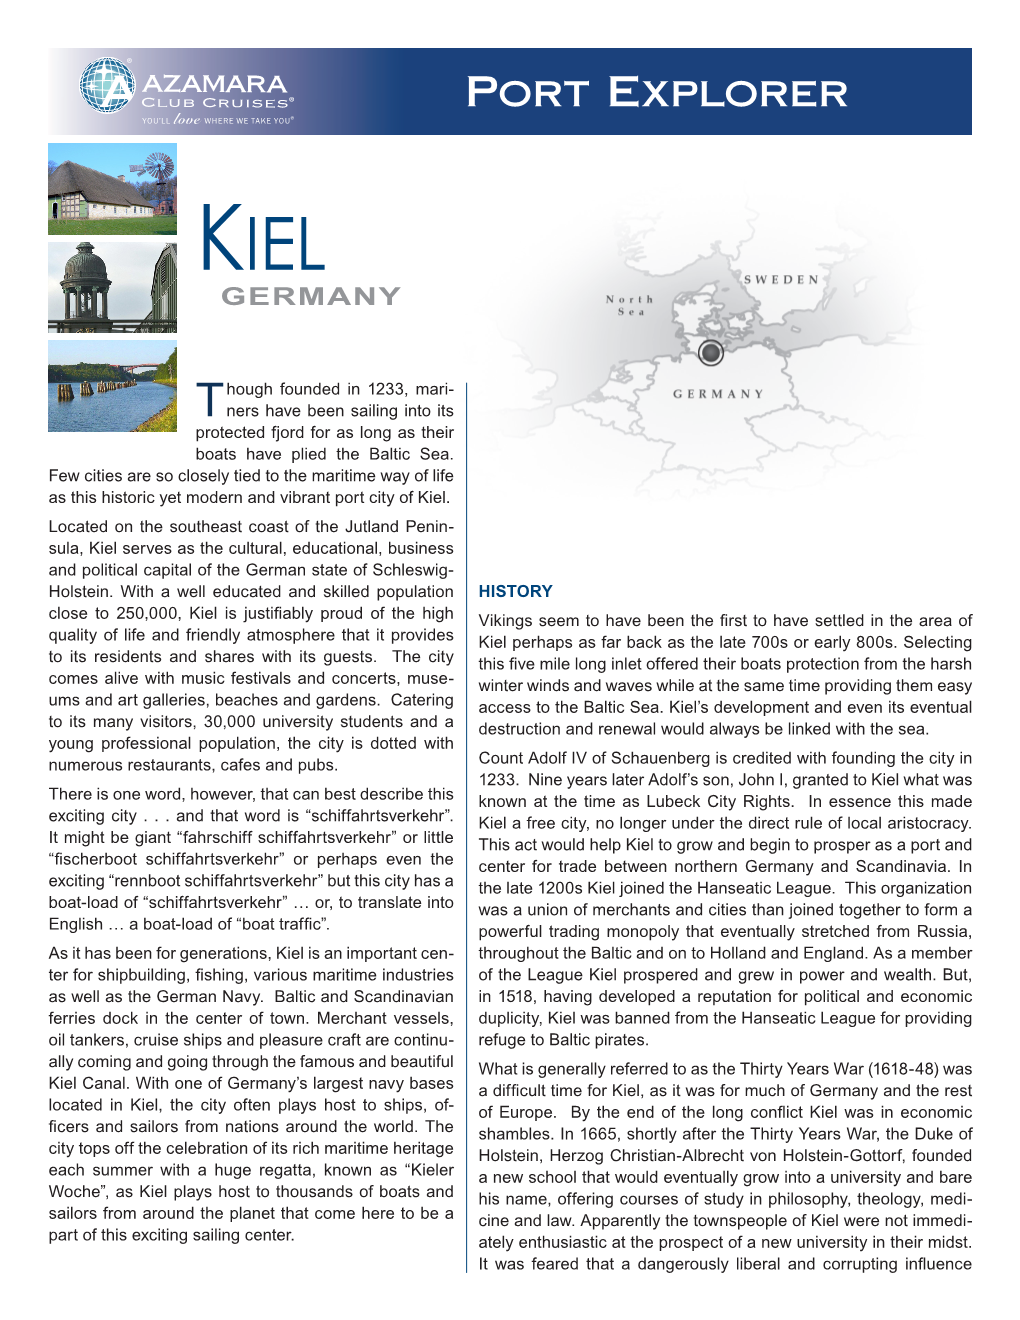 The Kiel Canal Ranks As One of the World’S Great Feats of 1 Engineering